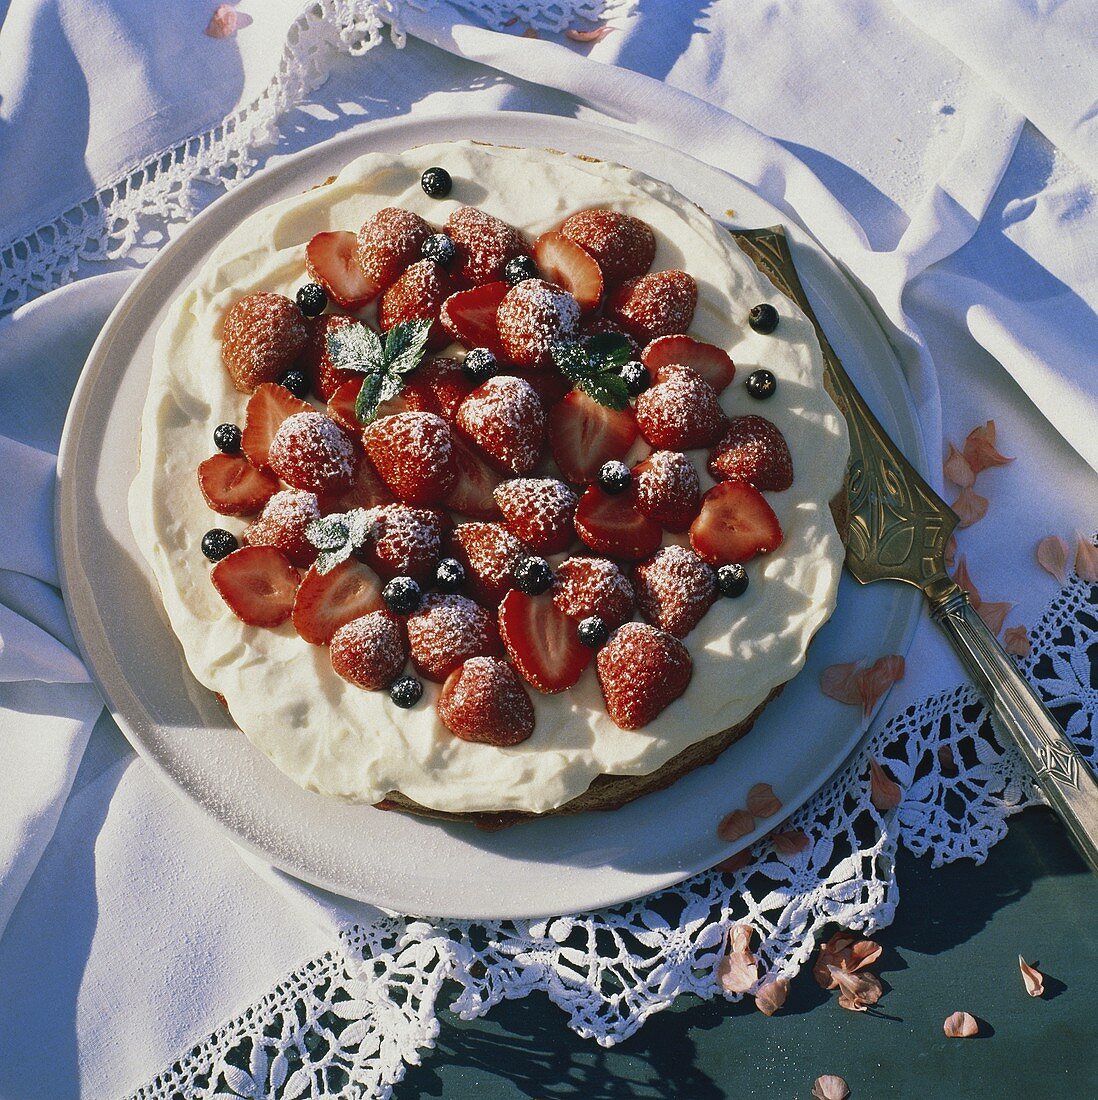 Strawberry and redcurrant gateau with cream